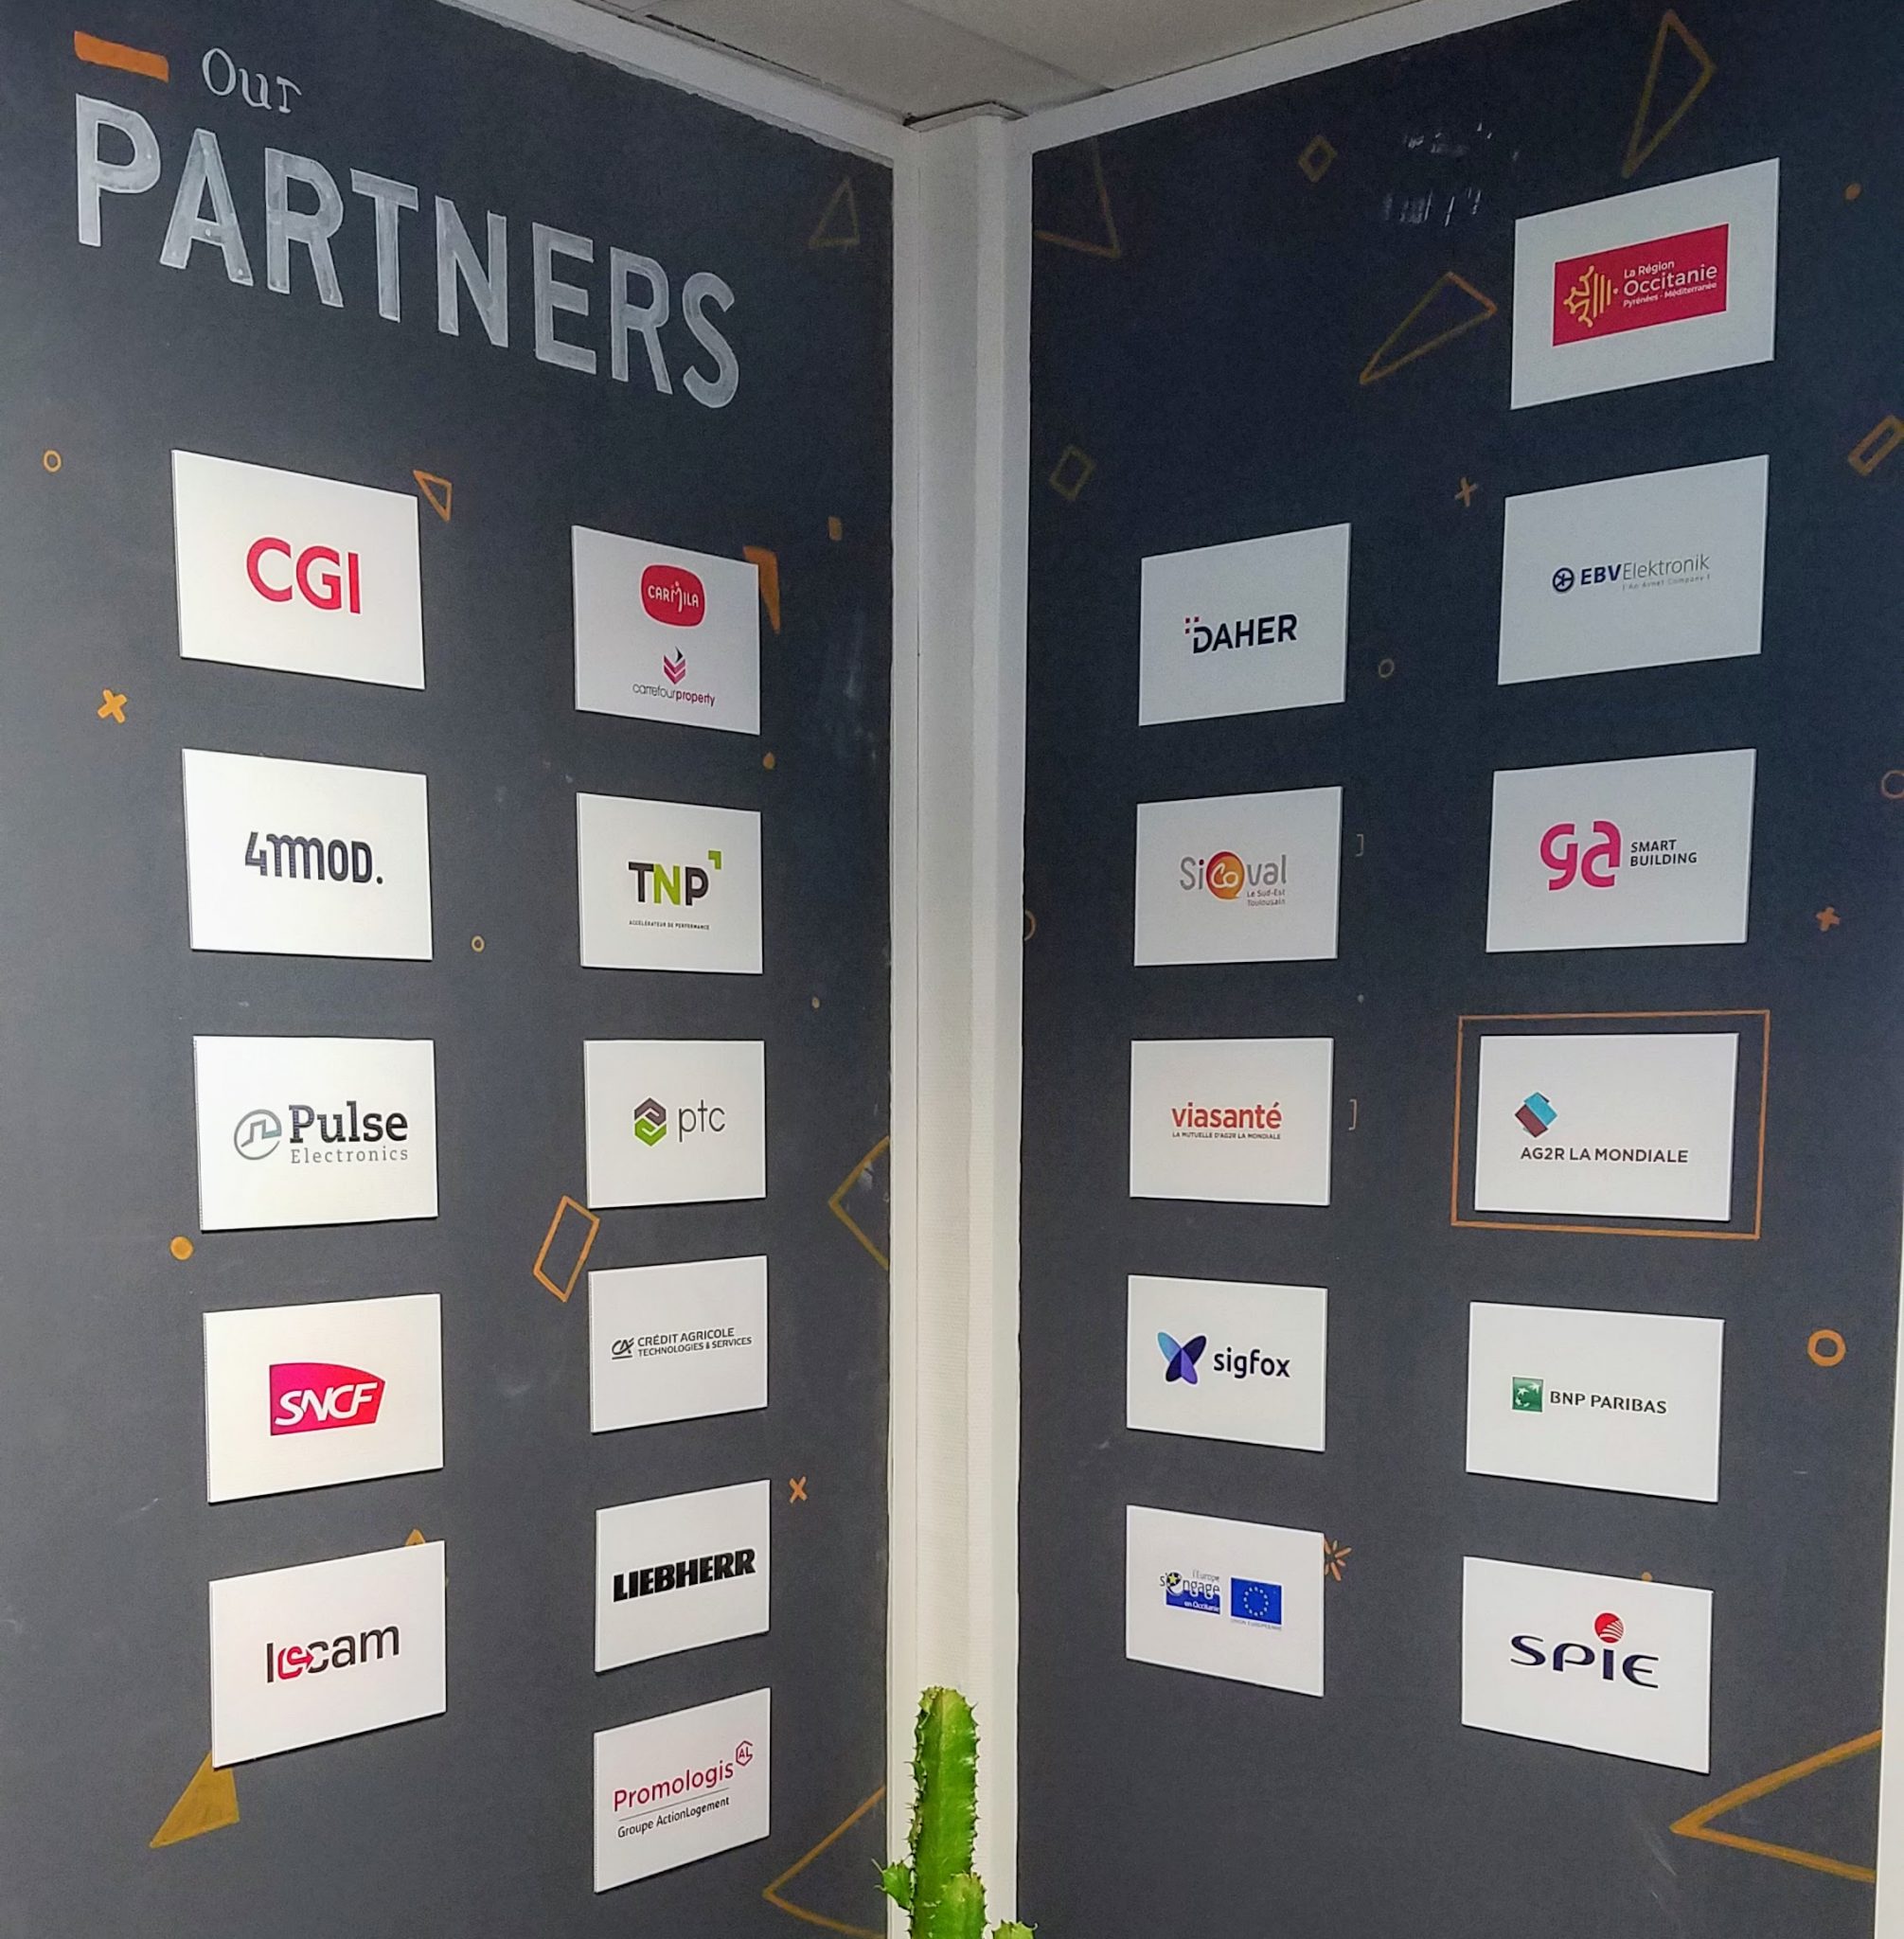 Corporate partners at IoT Valley